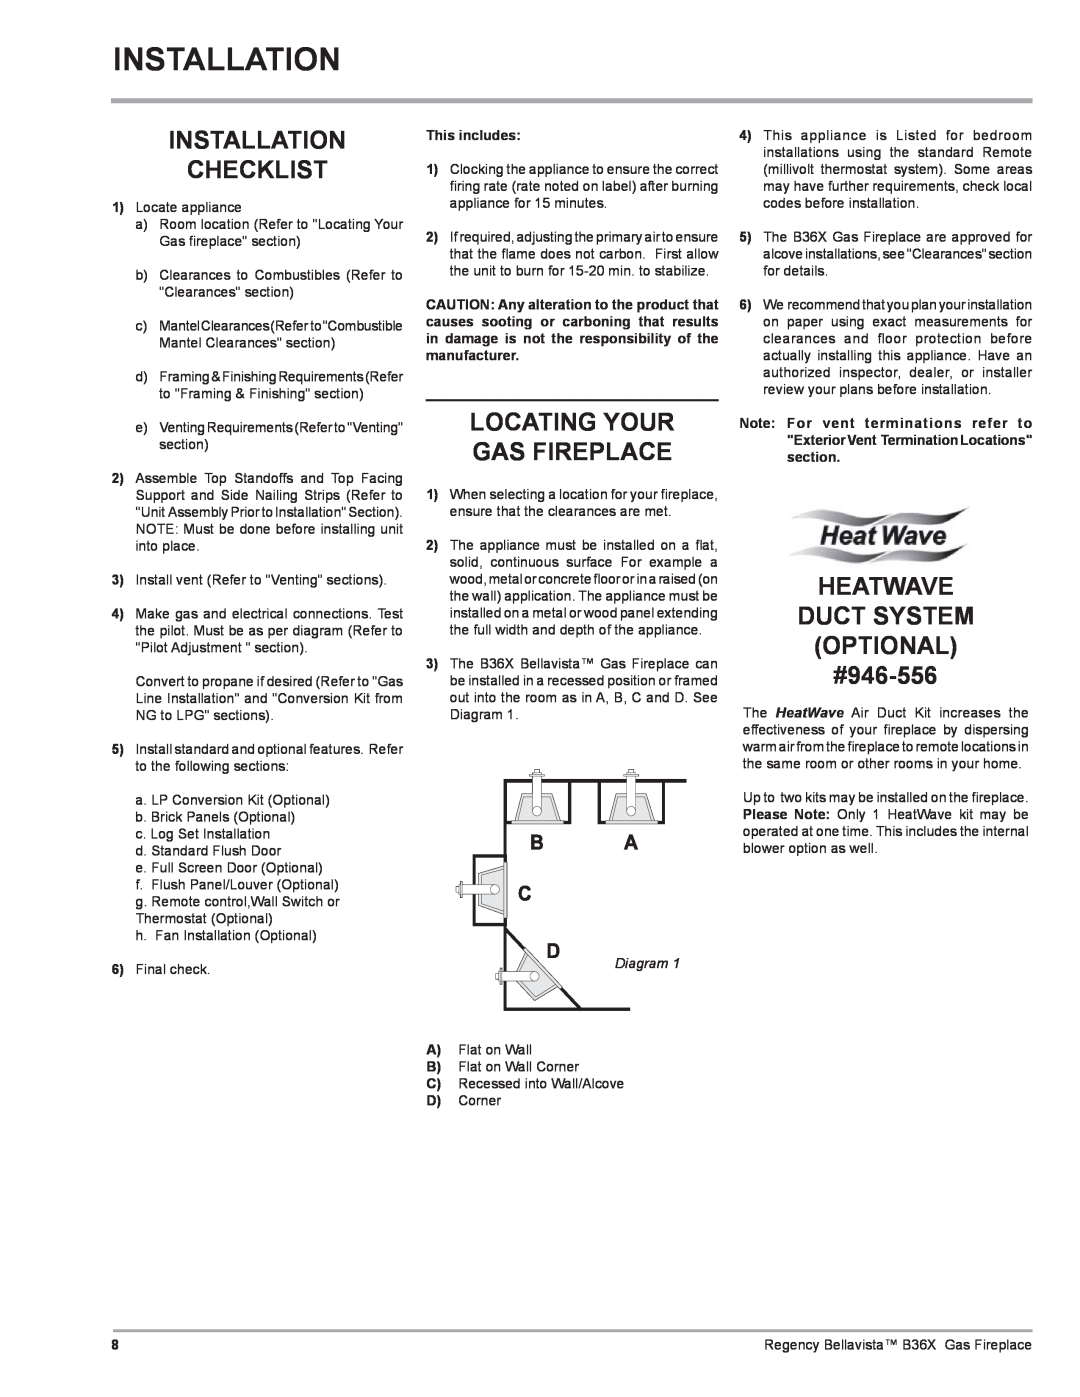 Regency B36X Installation Checklist, Locating Your Gas Fireplace, HEATWAVE DUCT SYSTEM OPTIONAL #946-556, Diagram 